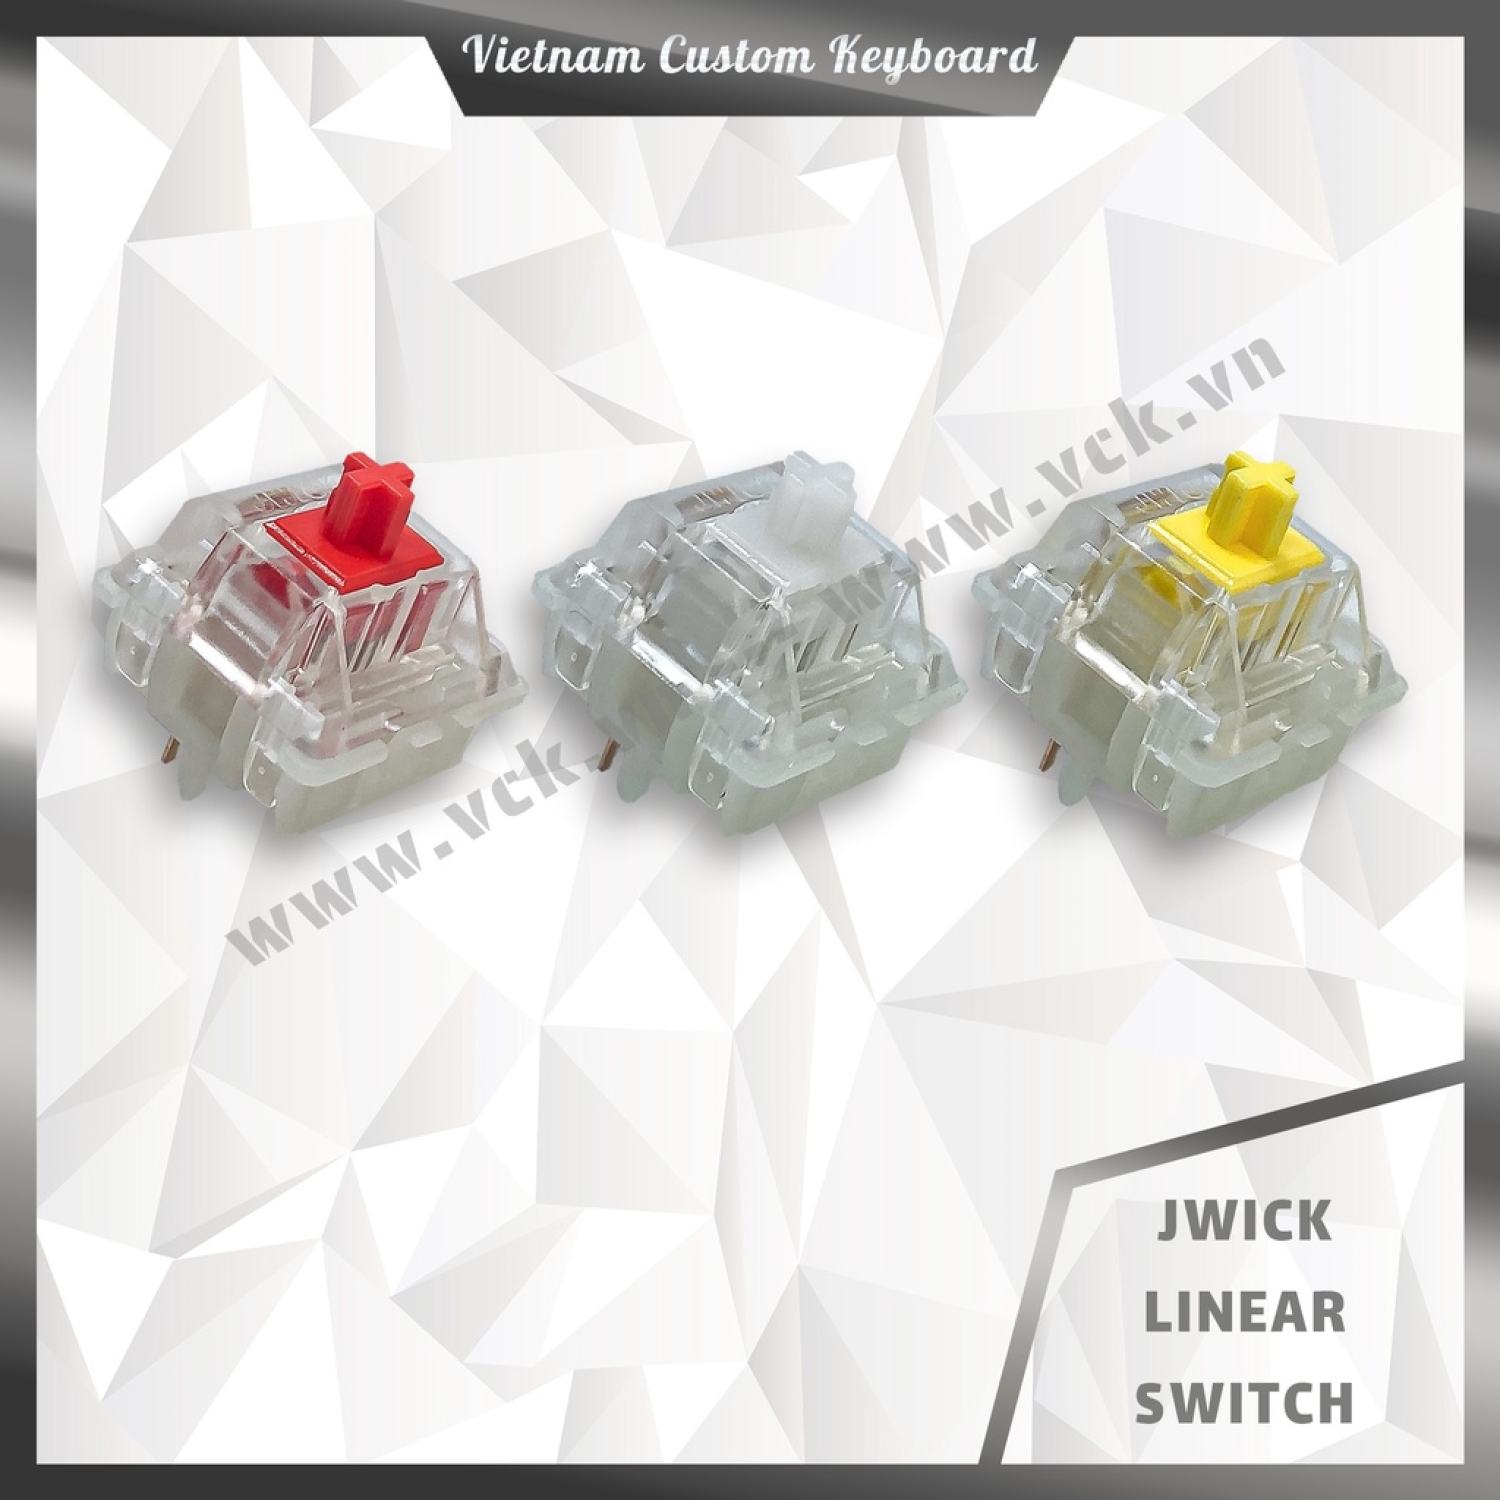 [In-Stock] Jwick Linear Switch Lubed 105-205 | Lựa Chọn Thay Thế Gateron & Akko CS | Red / Yellow / Clear | VCK